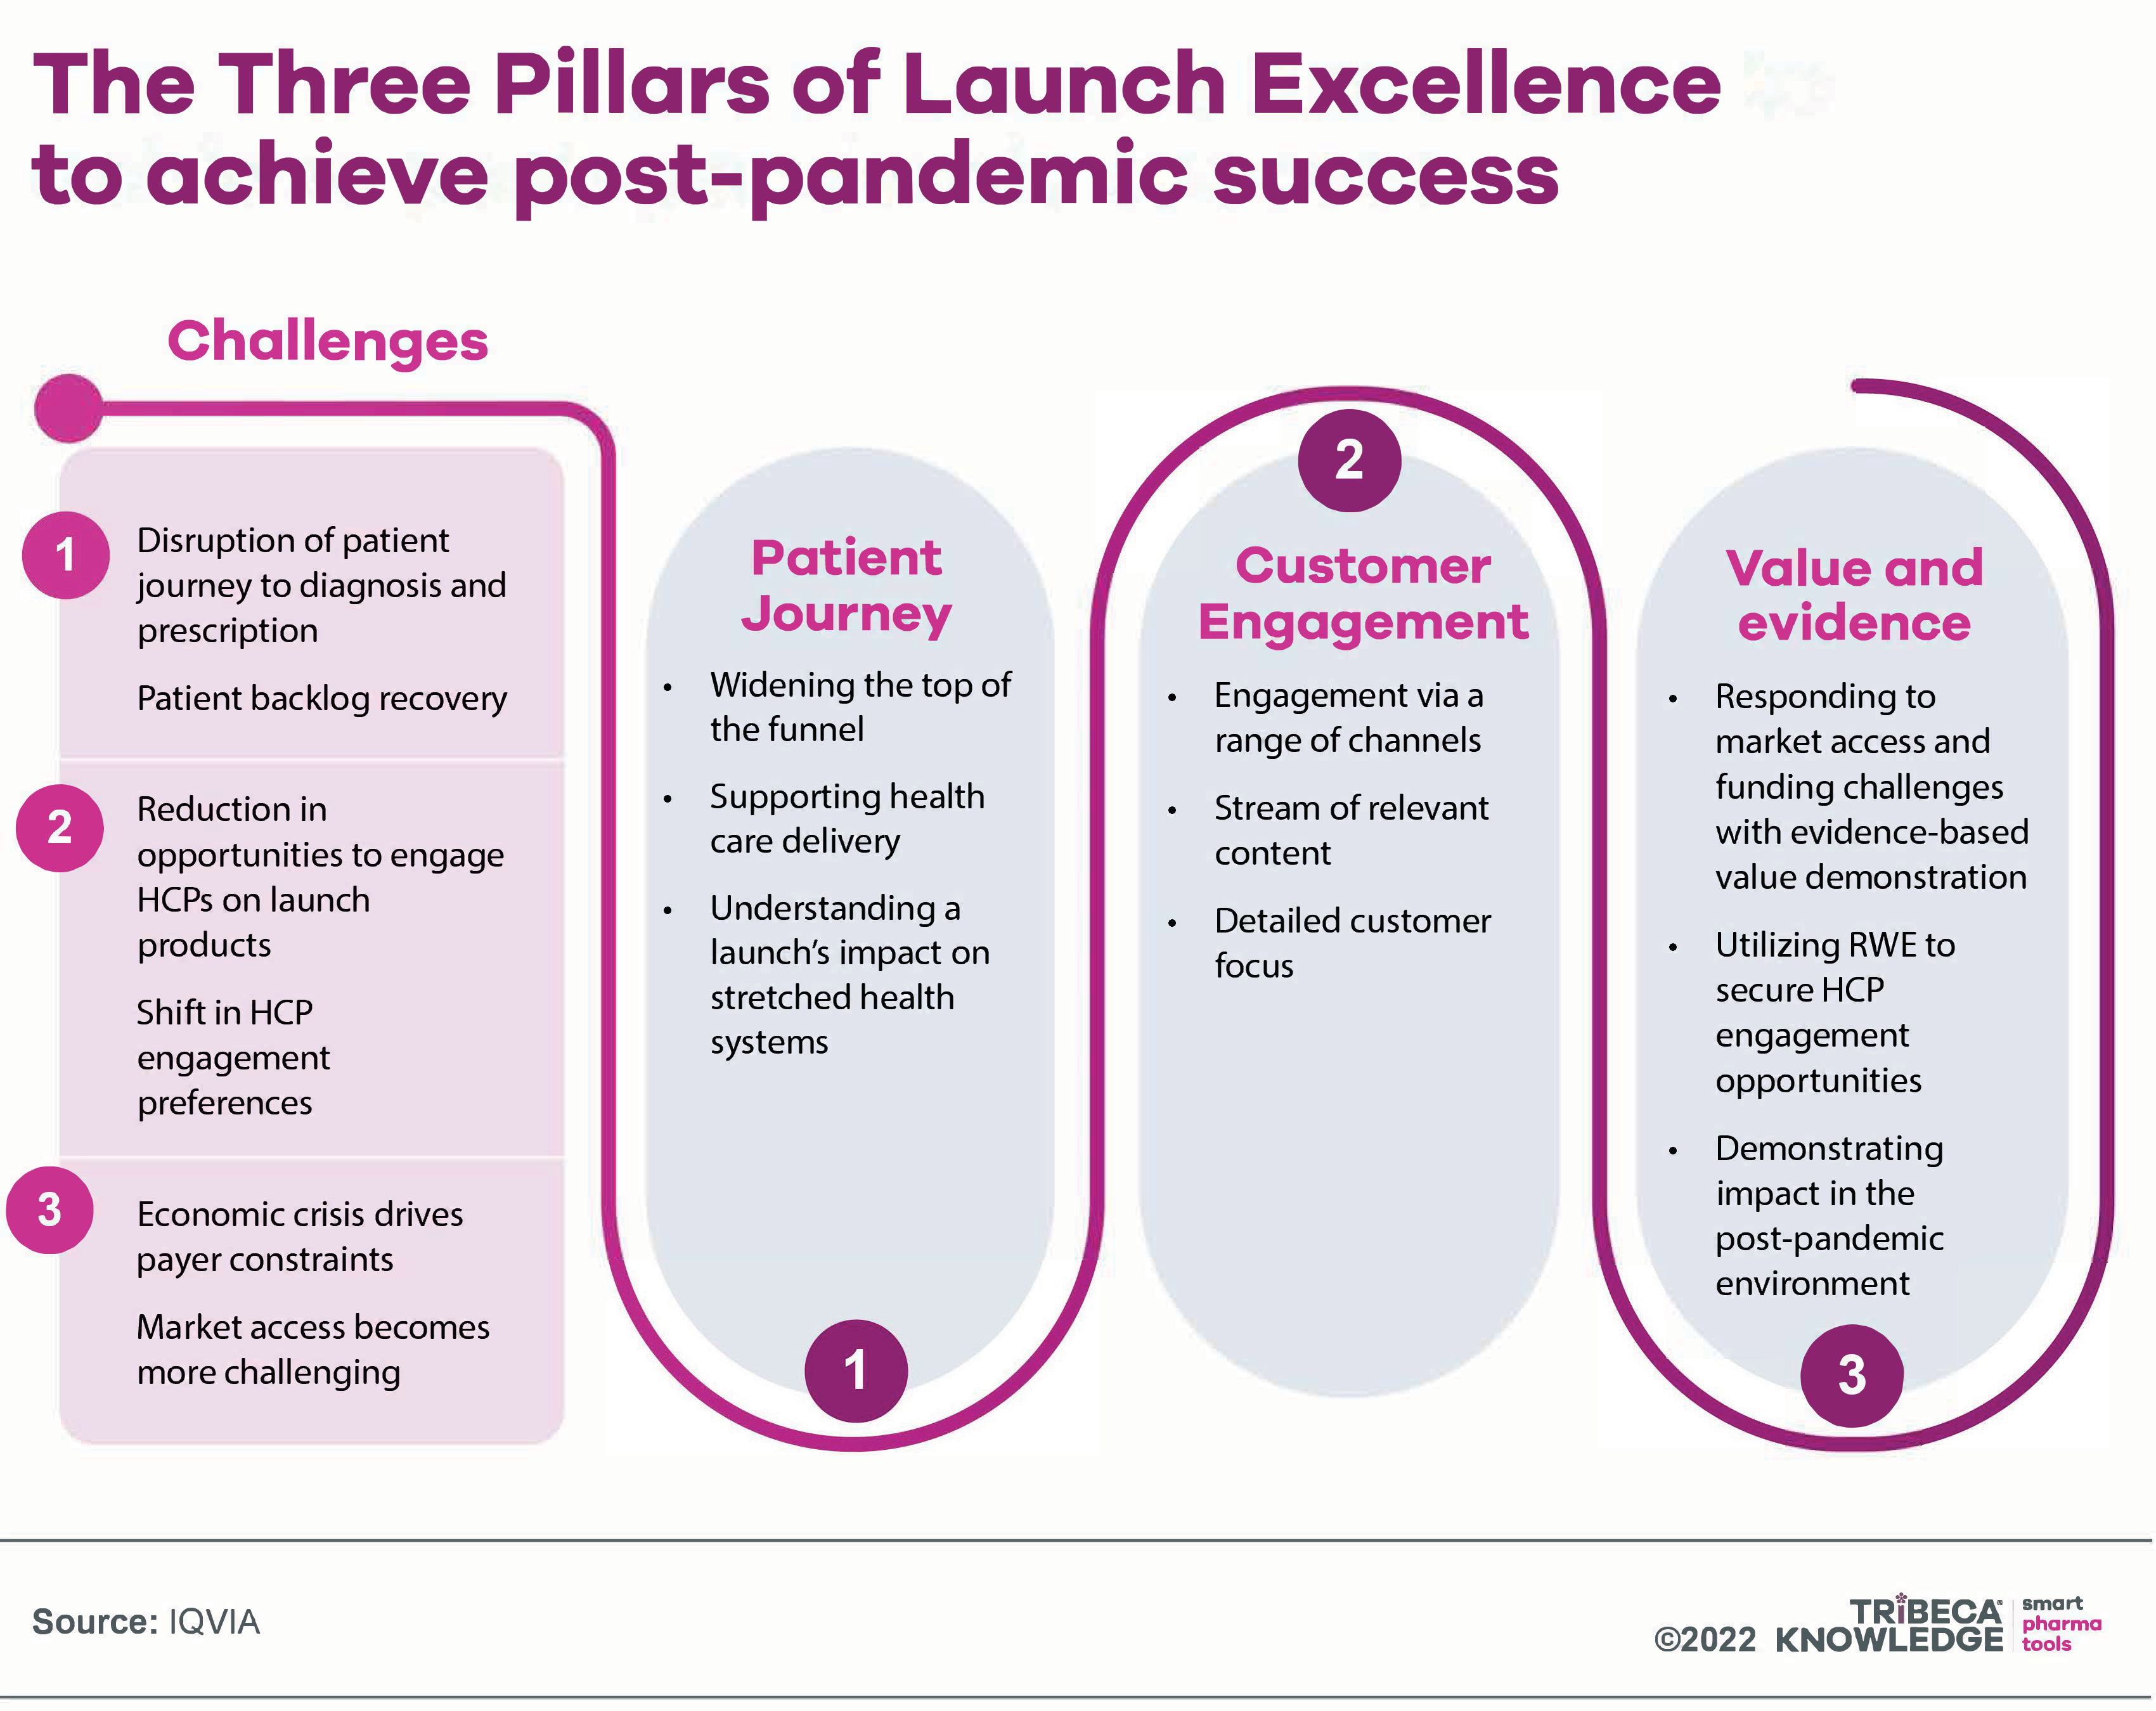 IQVIA graphic showing the three pillars of launch excellence